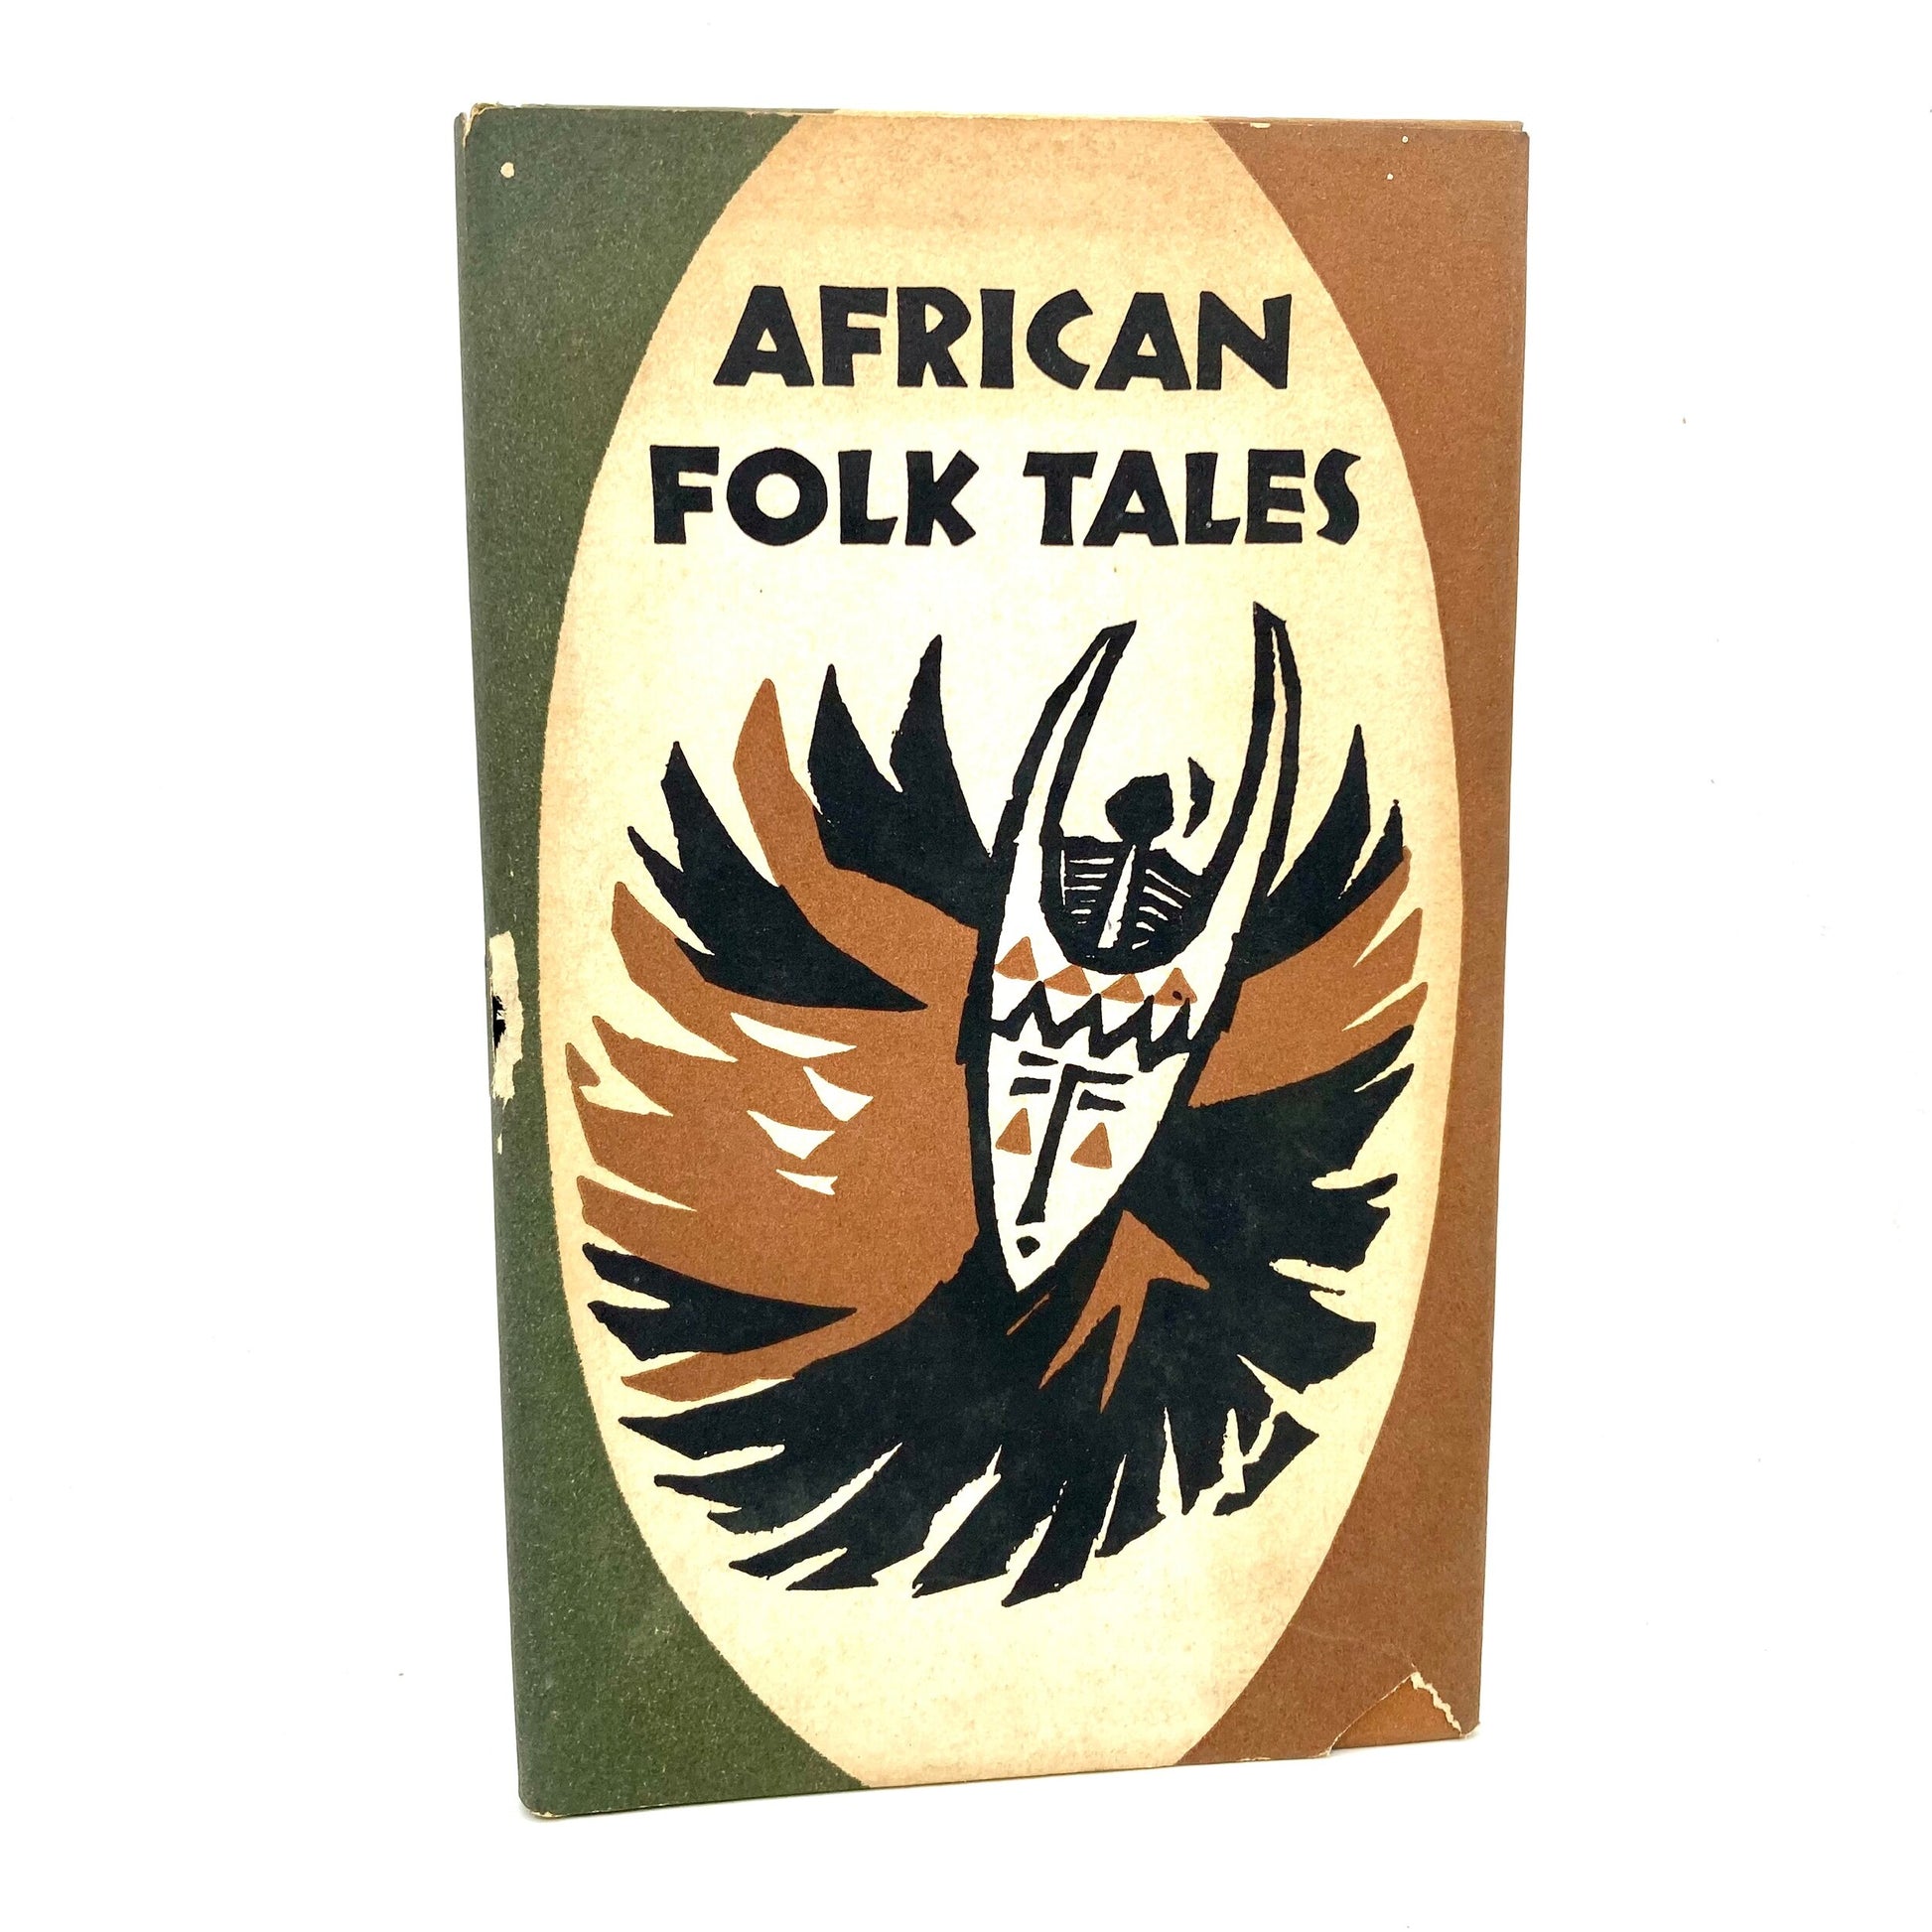 LESLAU, Charlotte and Wolf "African Folk Tales" [Peter Pauper Press, 1963] - Buzz Bookstore